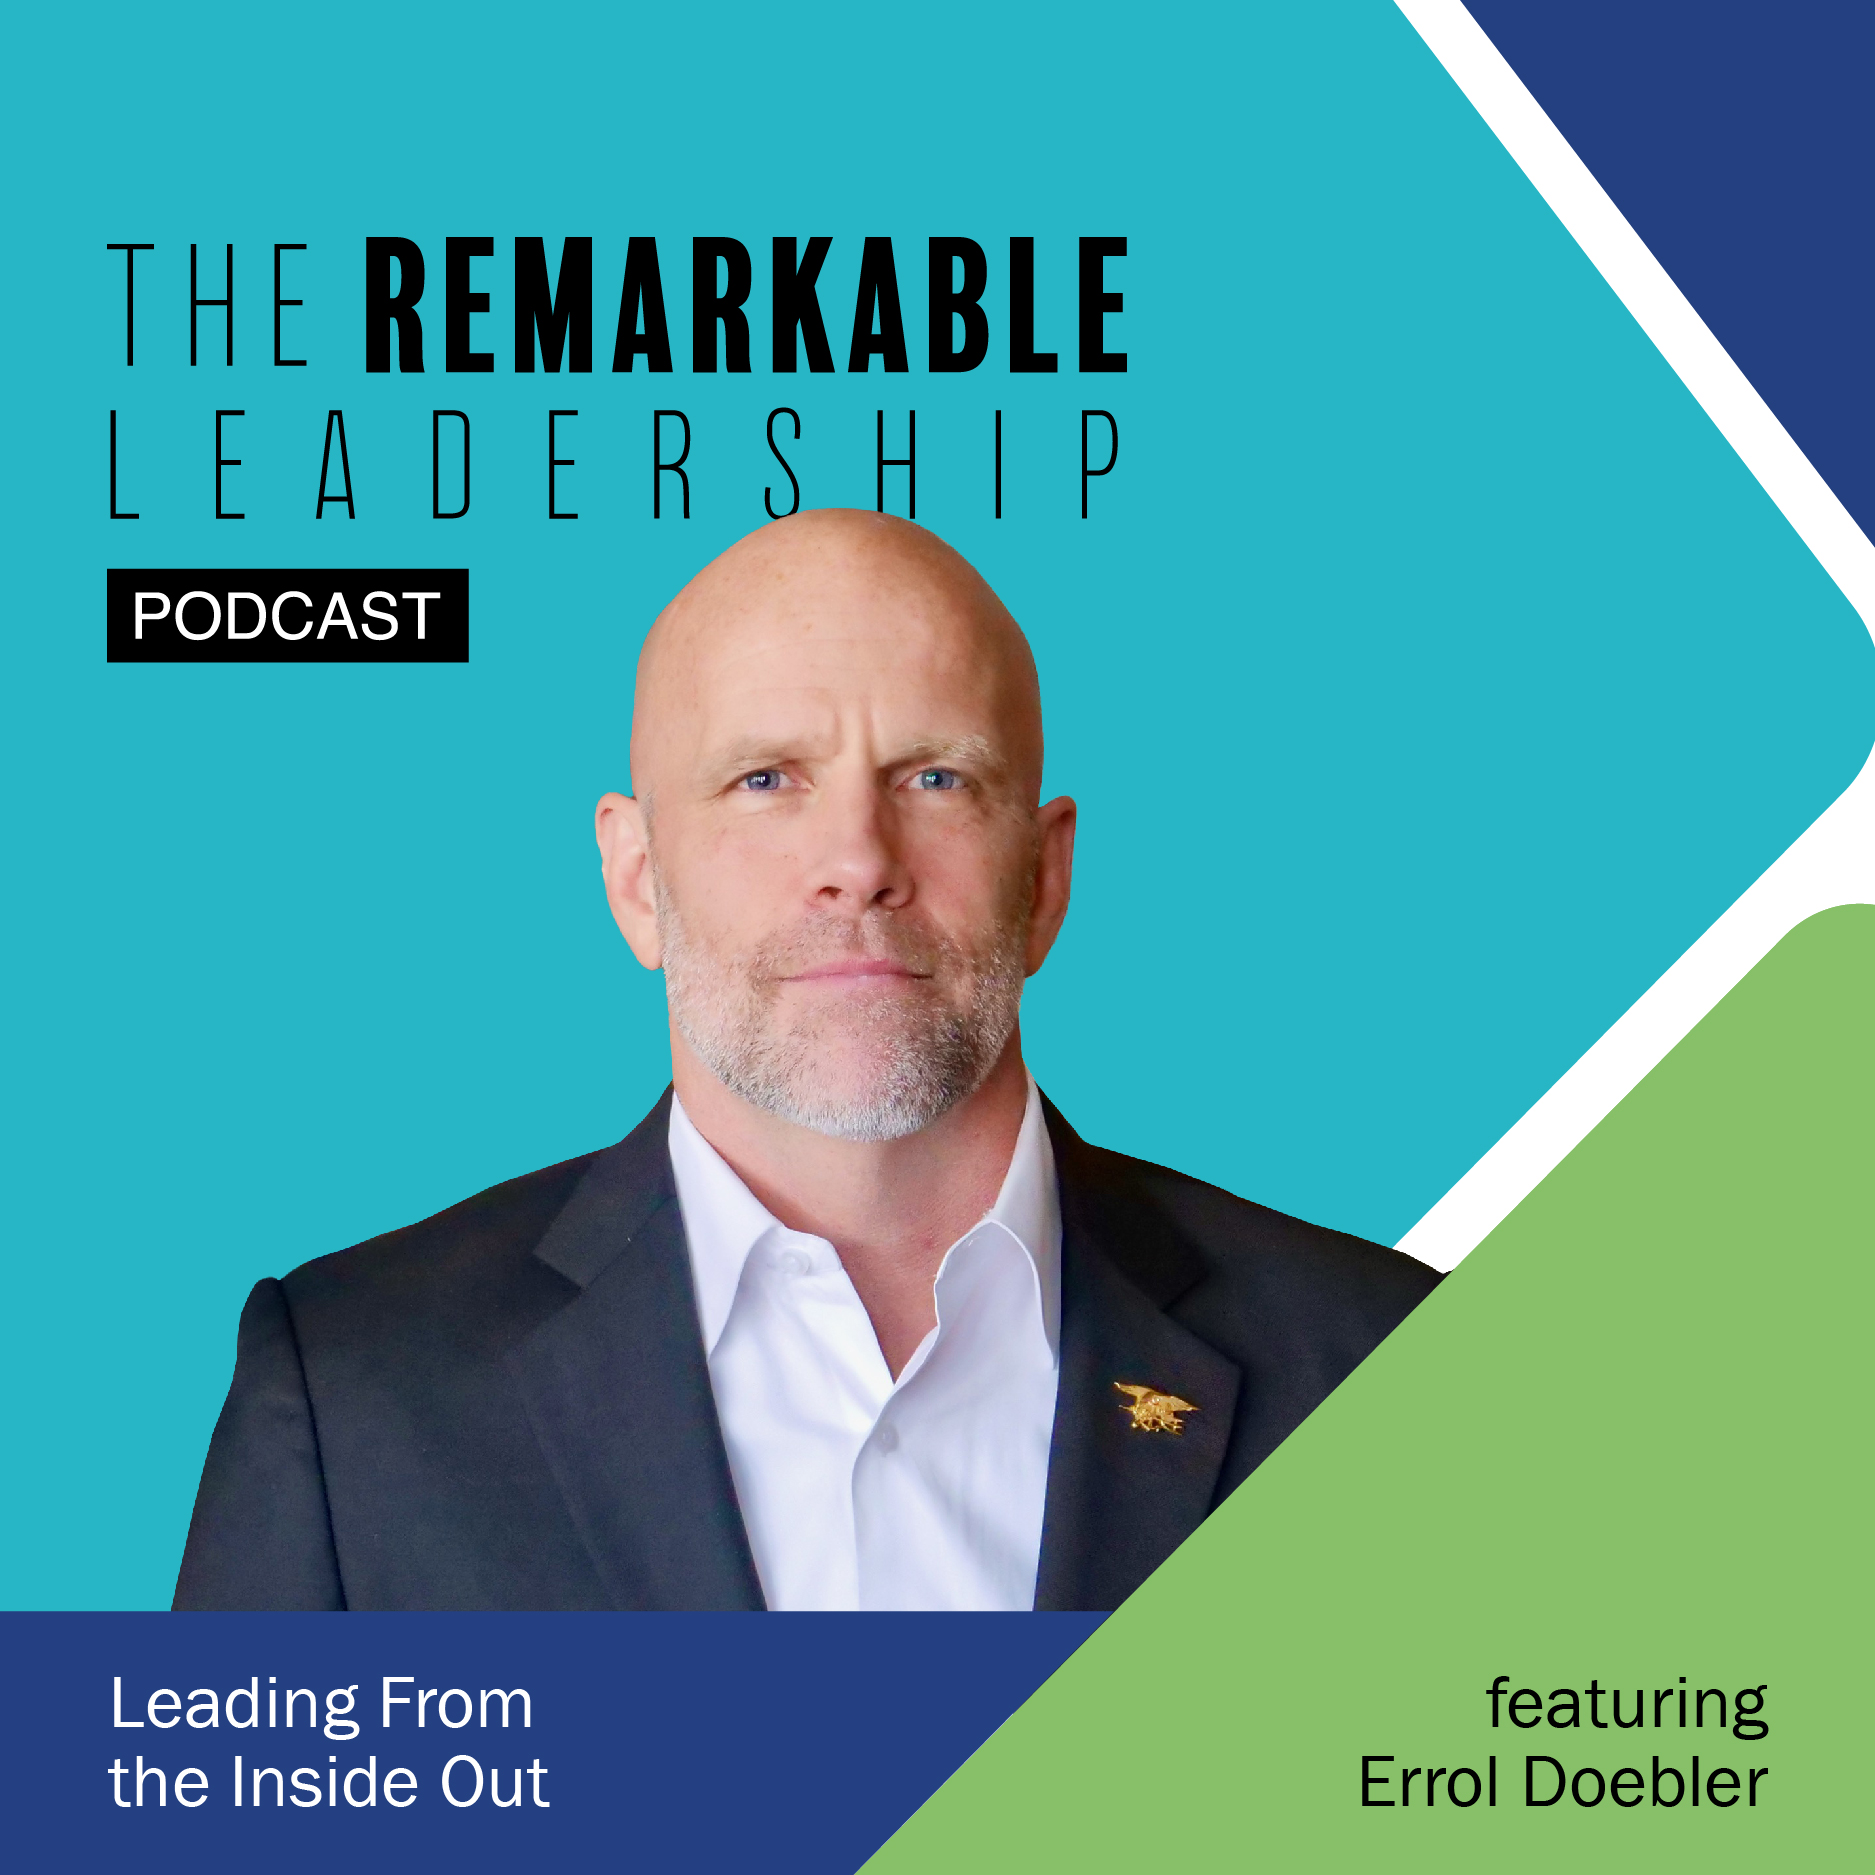 Leading From the Inside Out with Errol Doebler